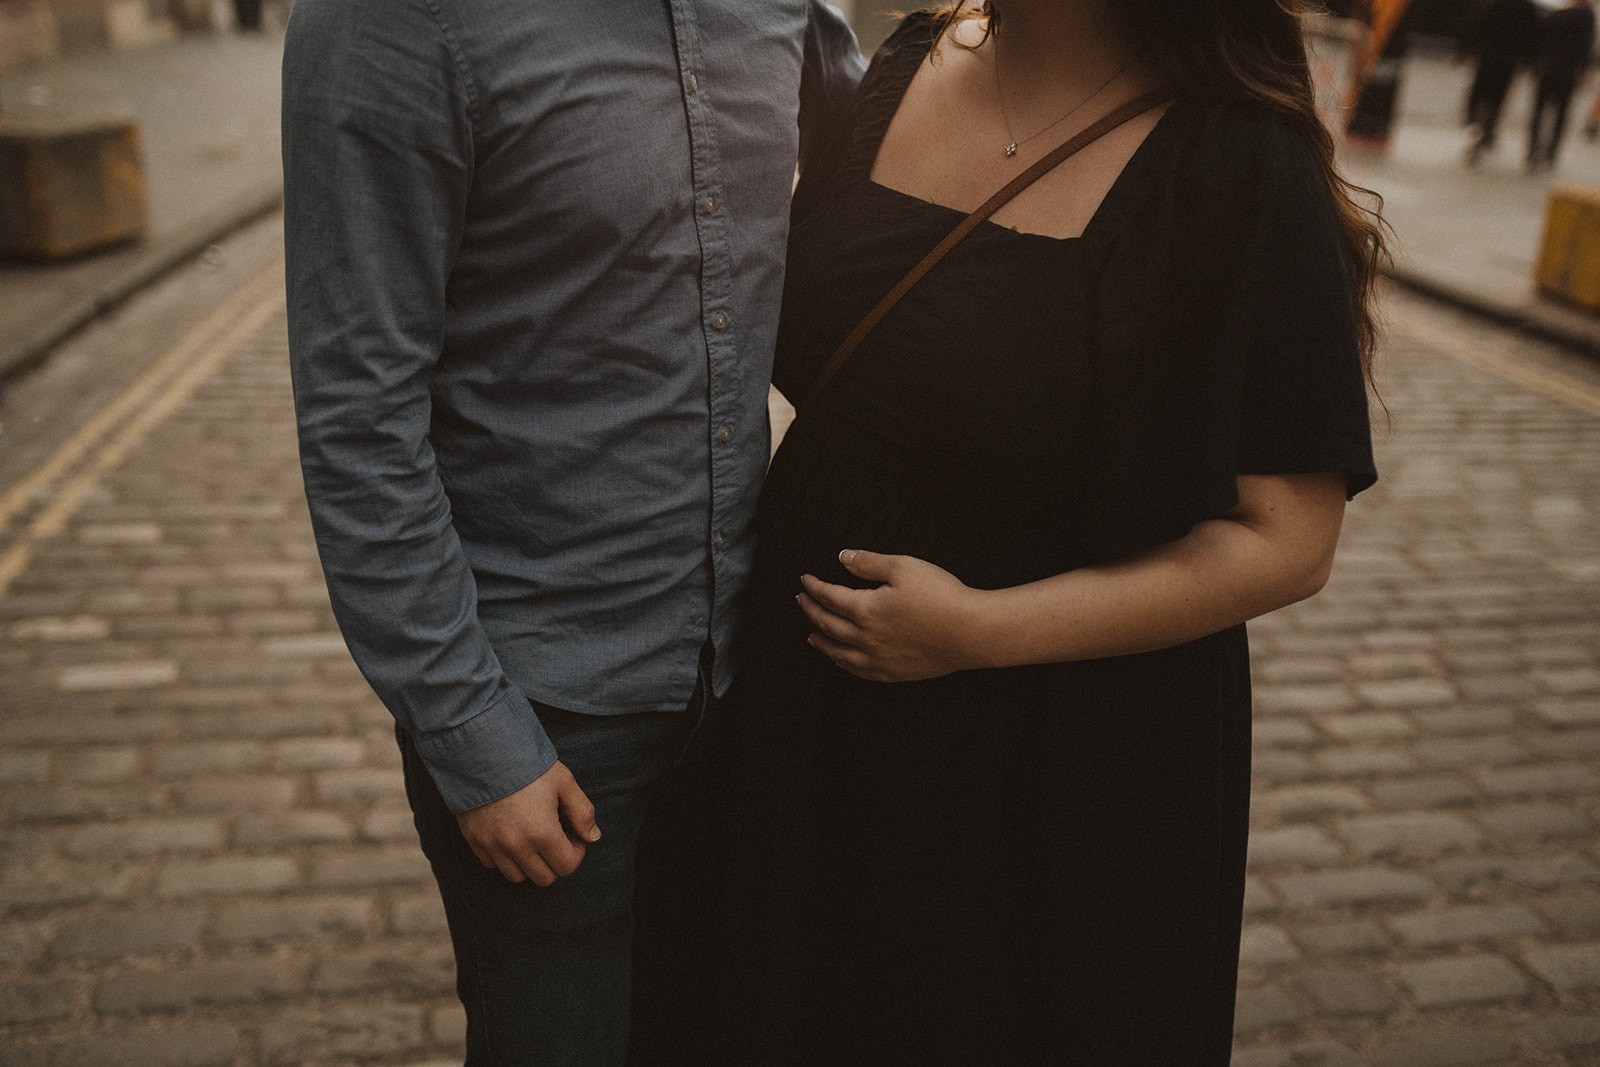 Lady holds bump and hugs her boyfriend during maternity photoshoot on Edinburgh Old Town Royal Mile photoshoot